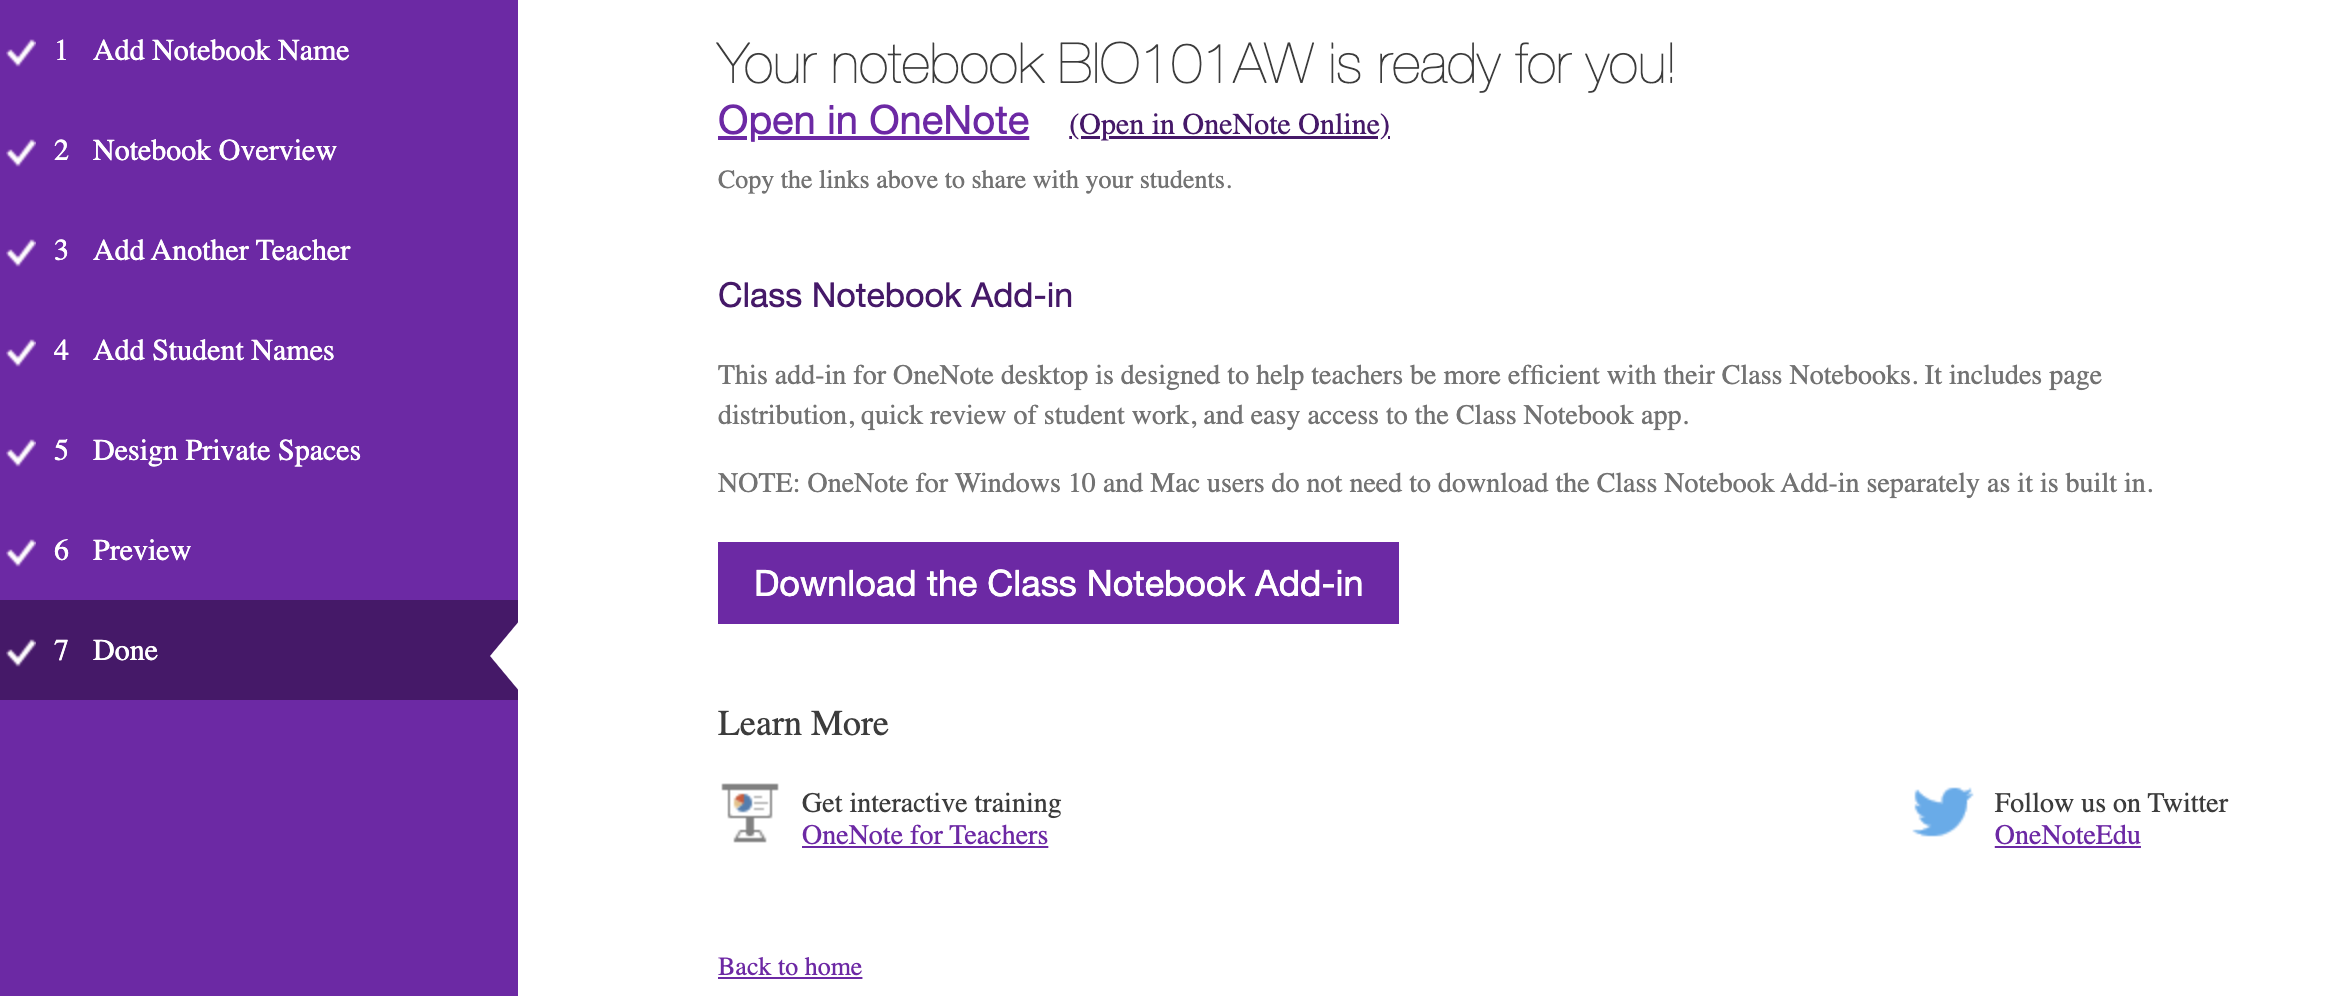 A confirmation screen "Your notebook is ready for you!" You have the option to download the class notebook add-in.